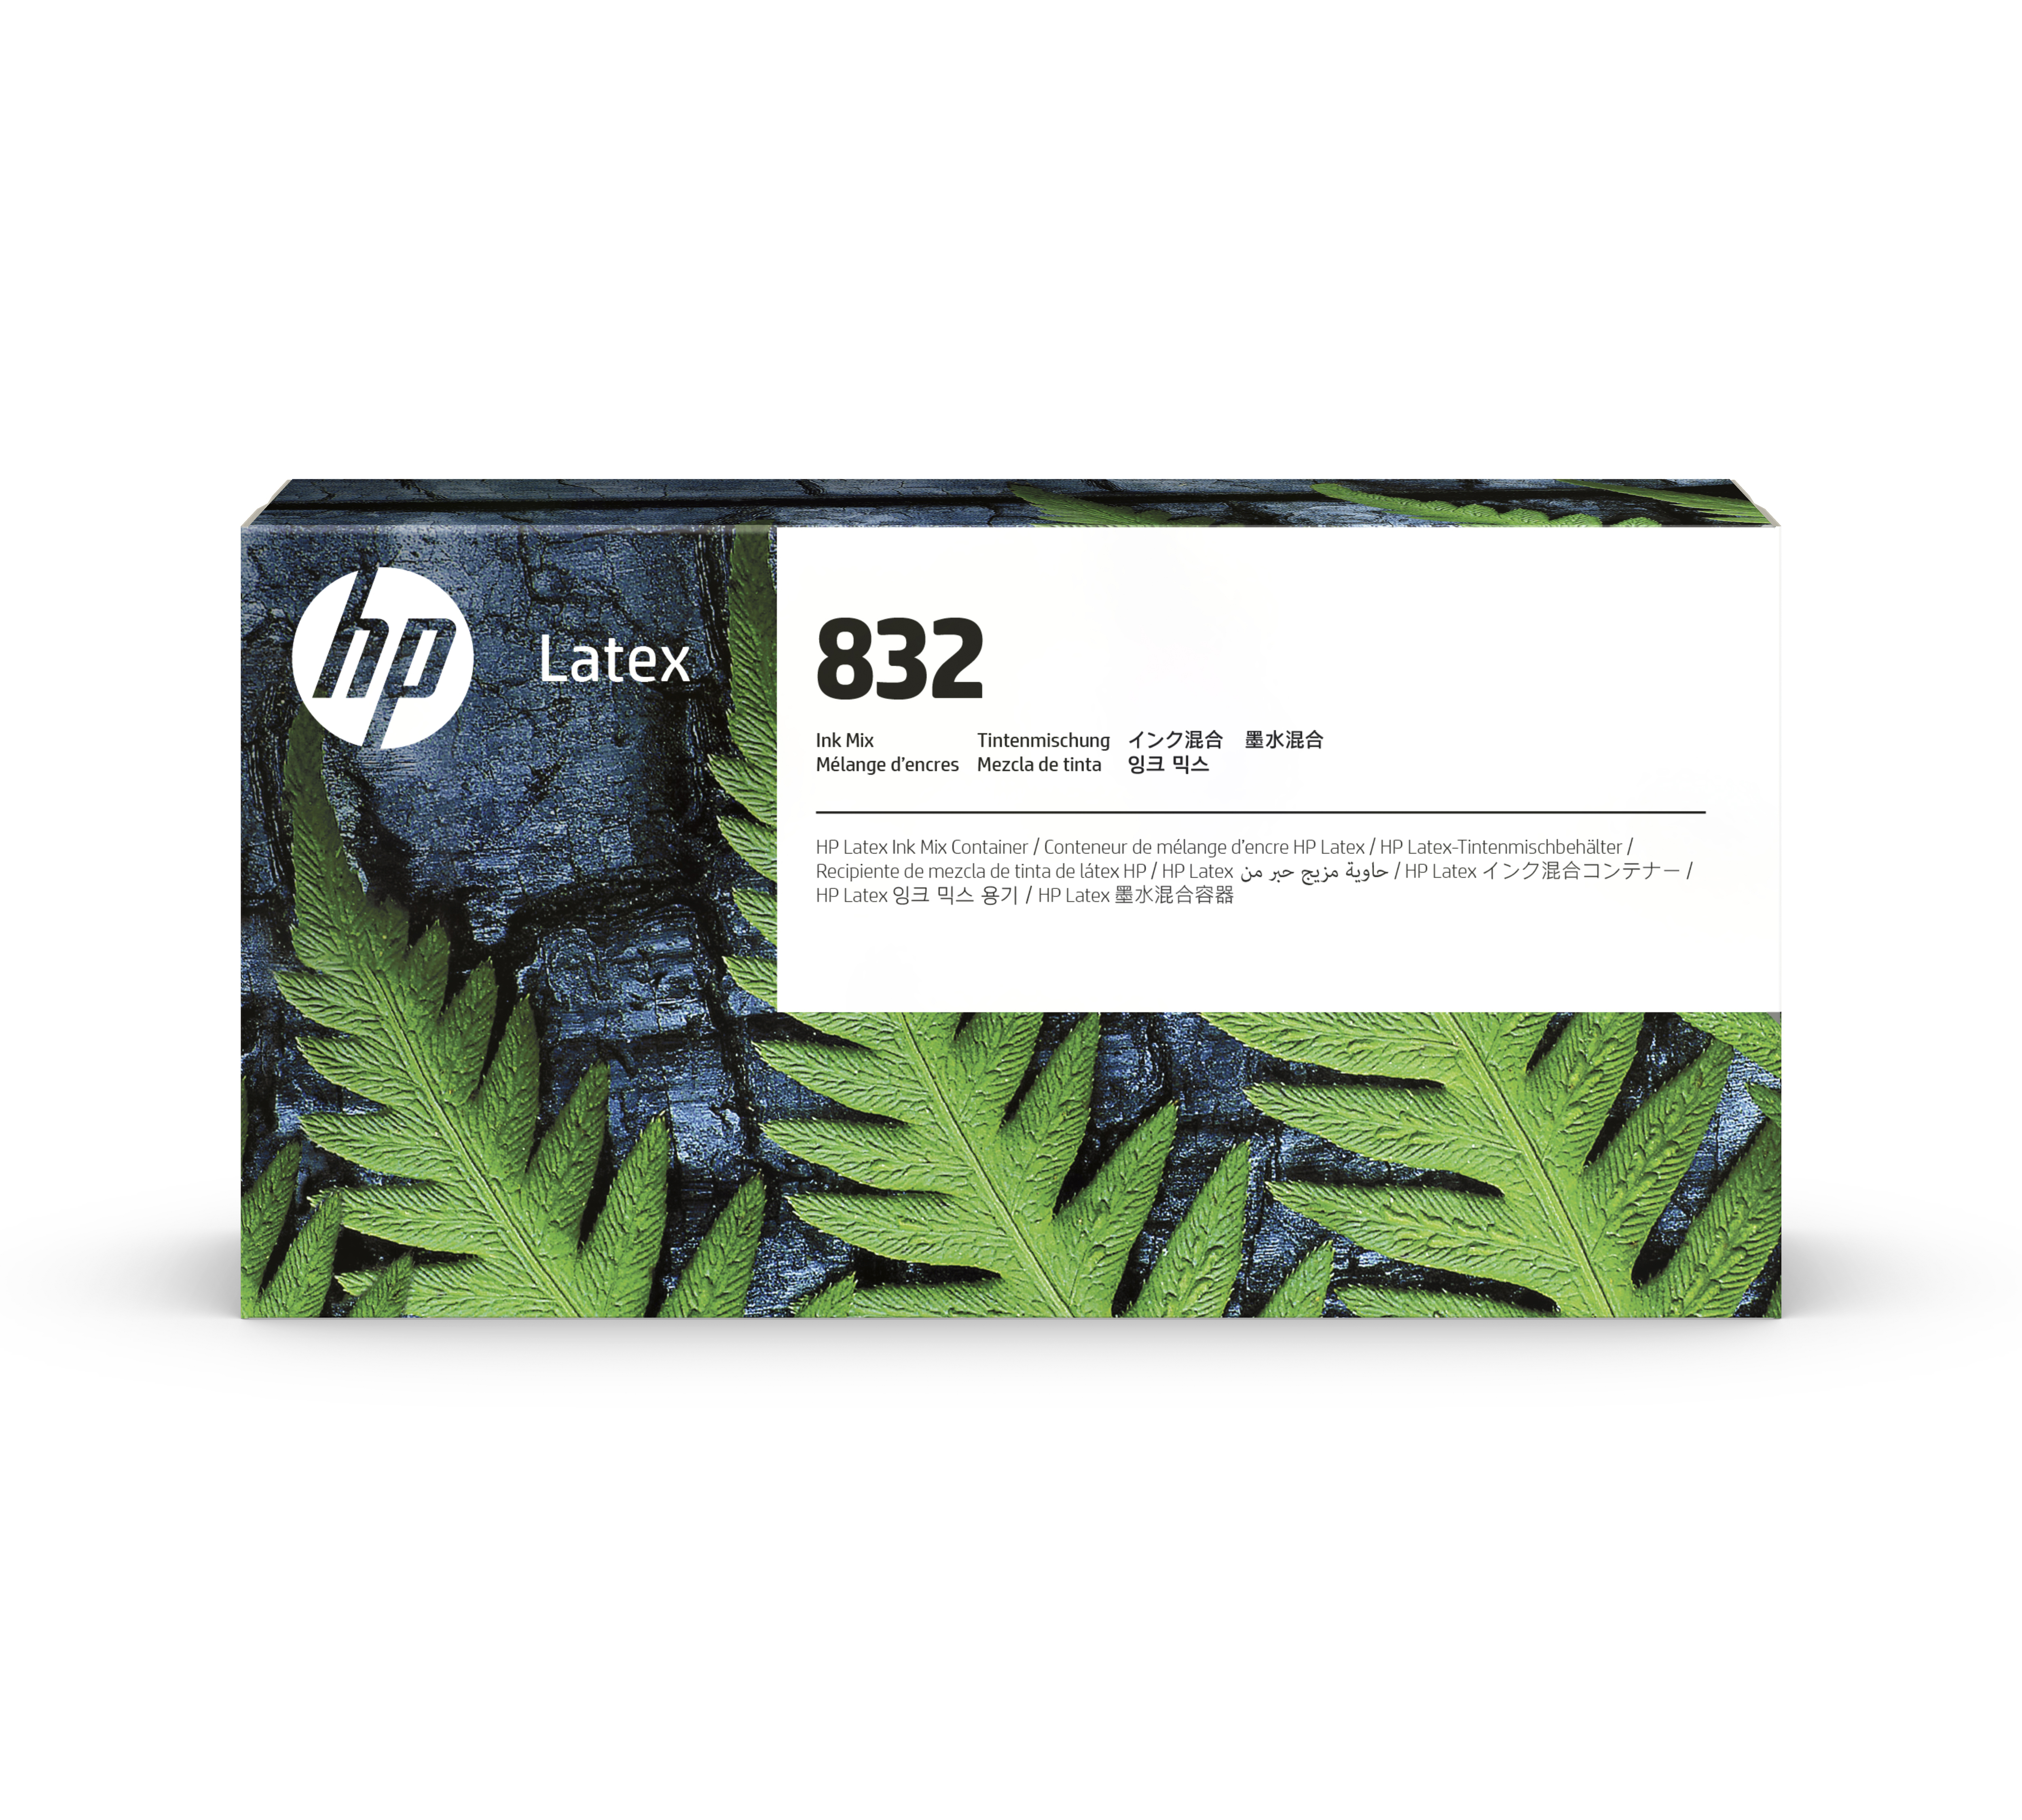 HP 832 Latex Ink Mix Container